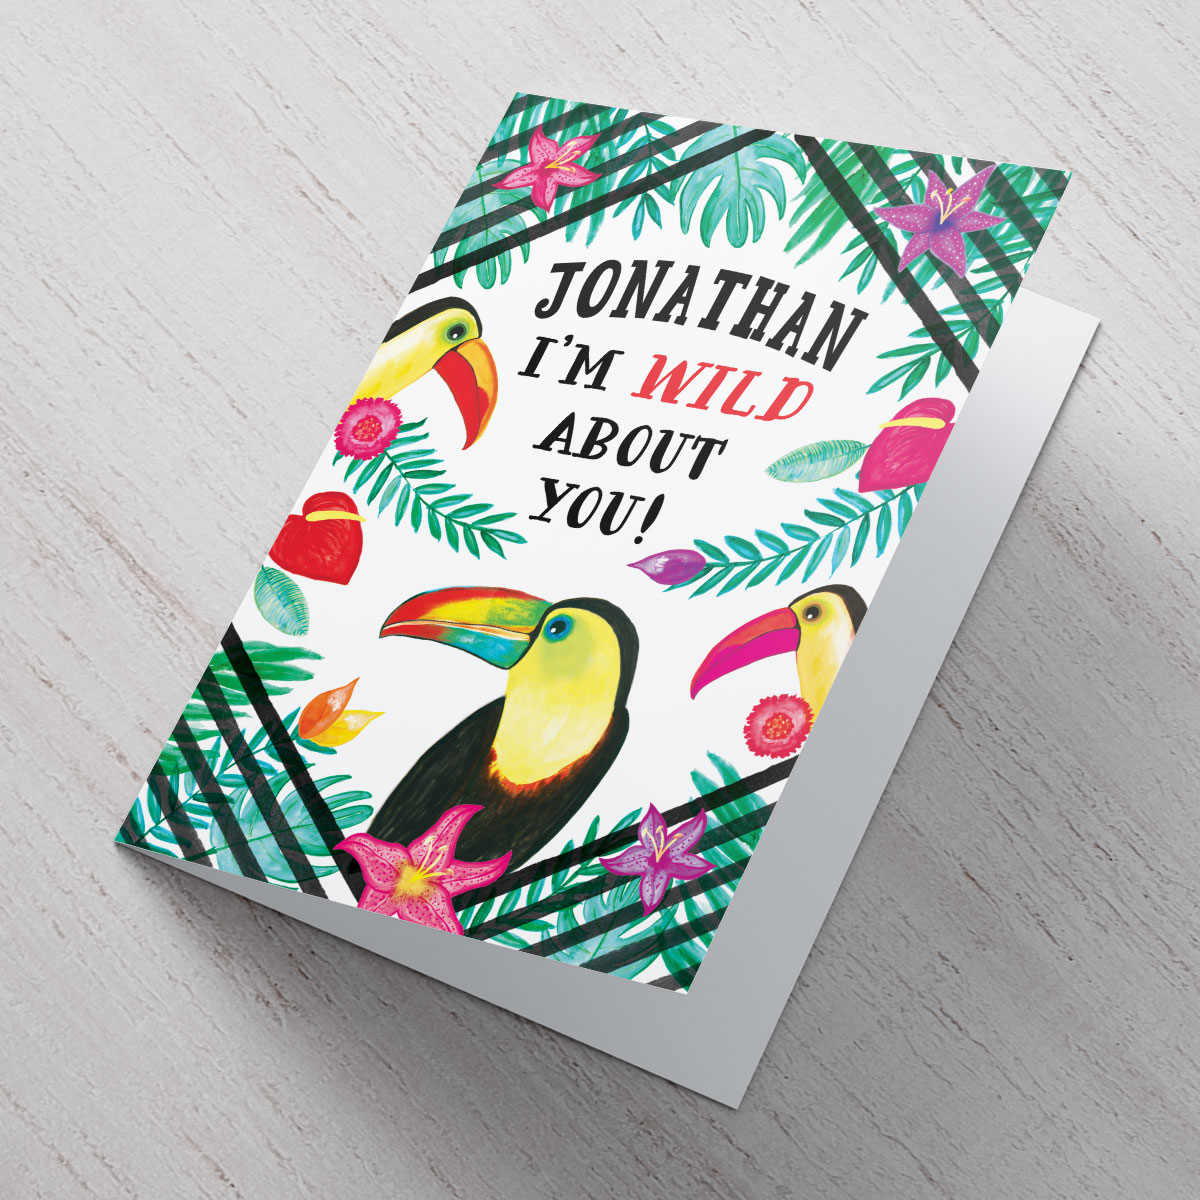 Personalised Card - Wild About You